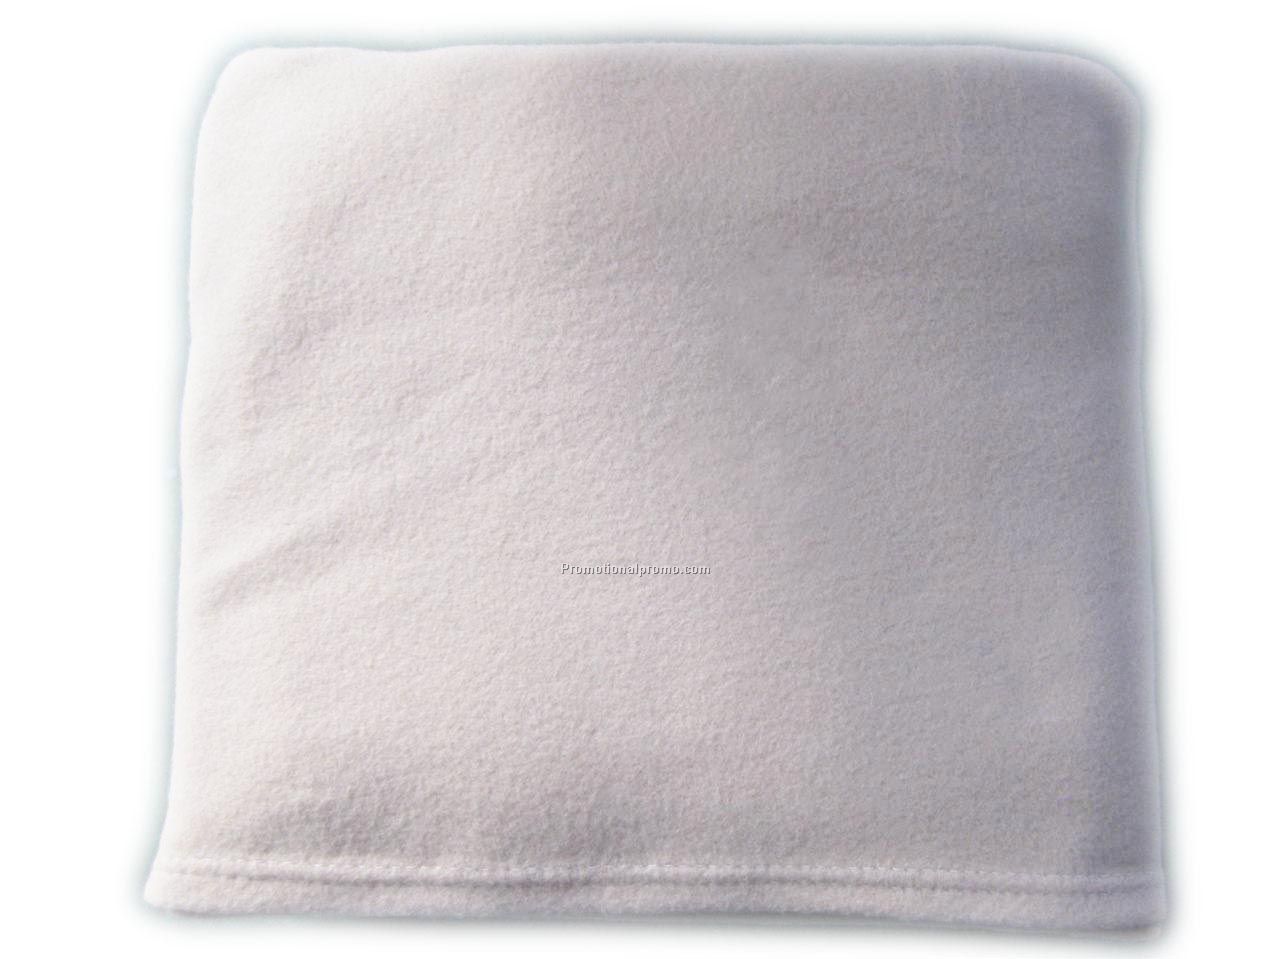 2-in-1 Pillow and Blanket